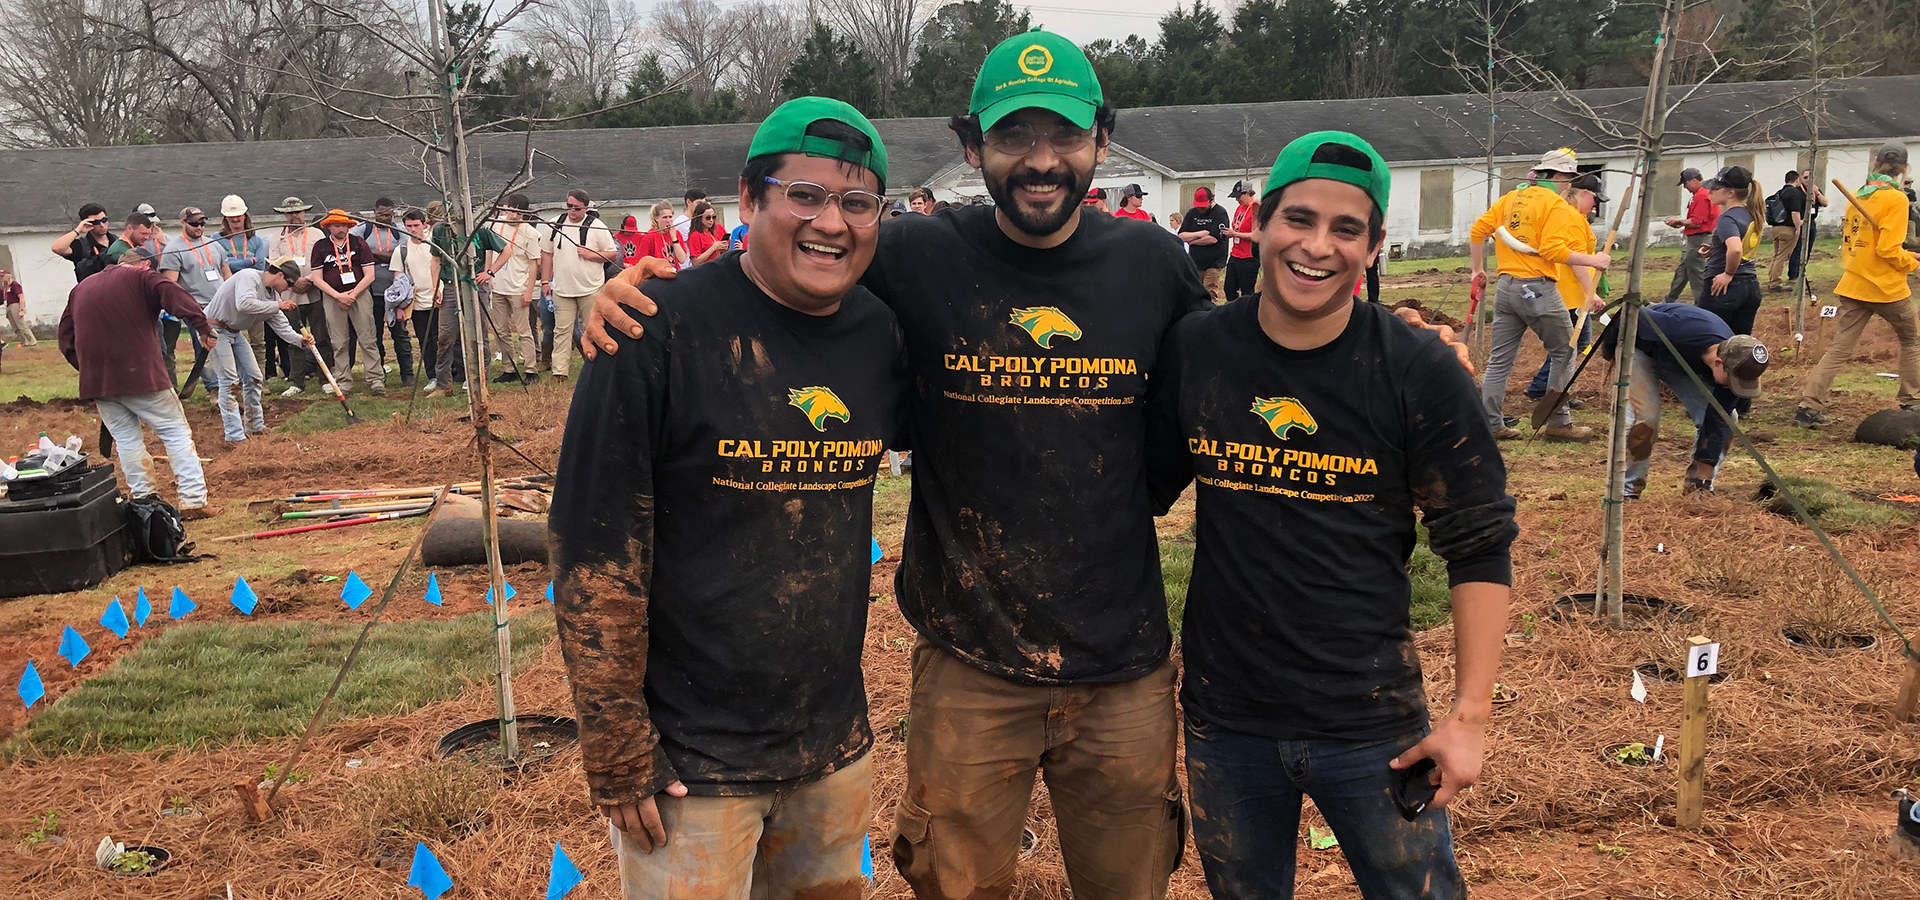 Three muddy, but happy, Cal Poly Pomona students outdoors at the competition.